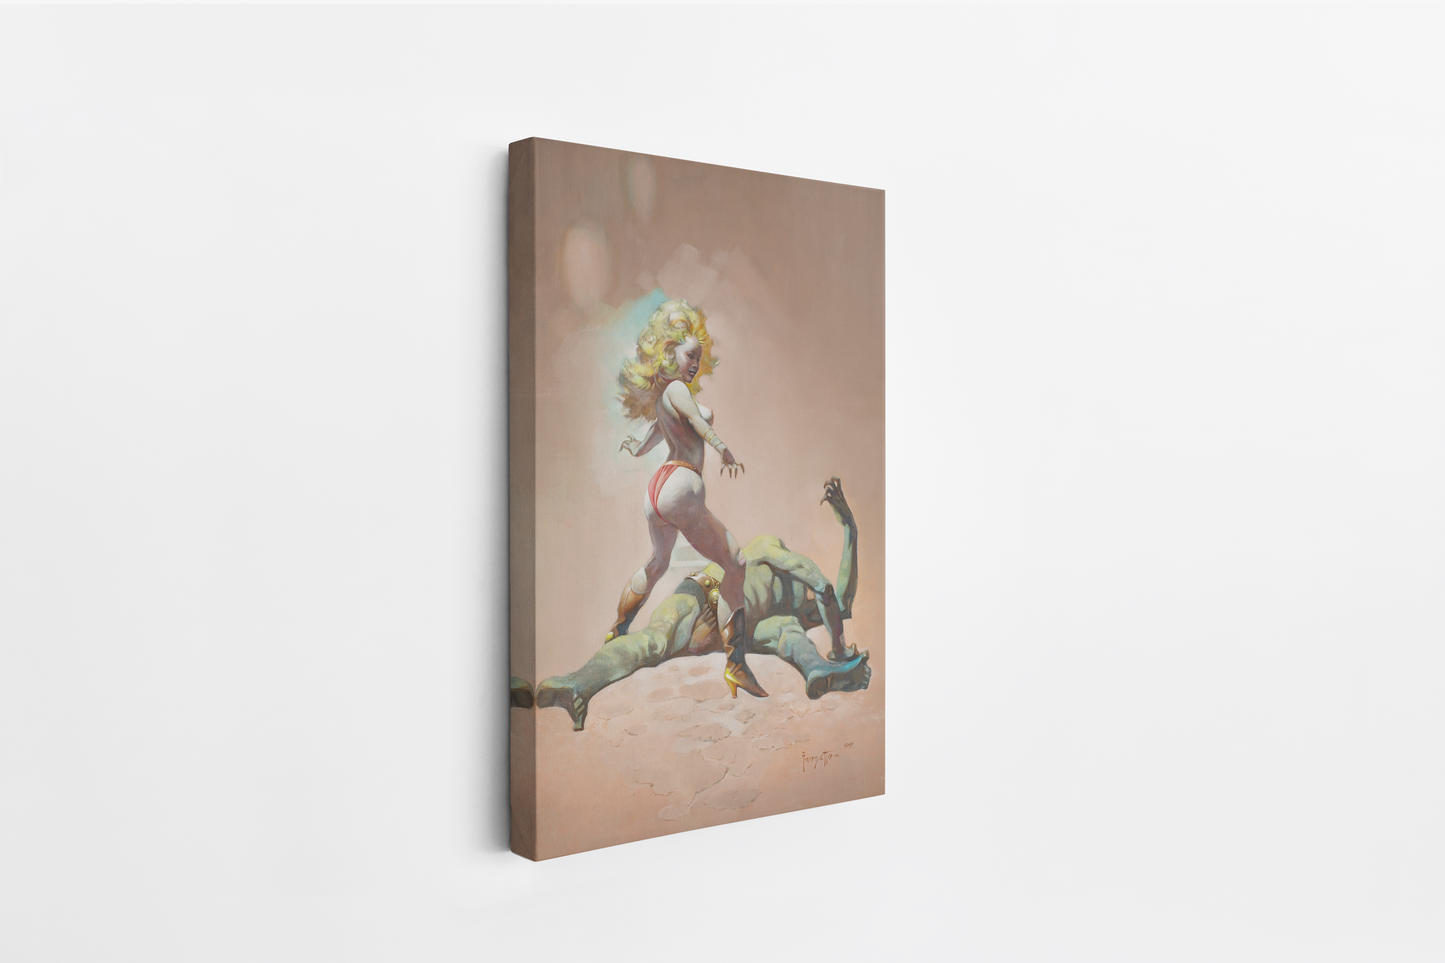 The Countess and the Green Man Mini Wrap-Around Canvas Art